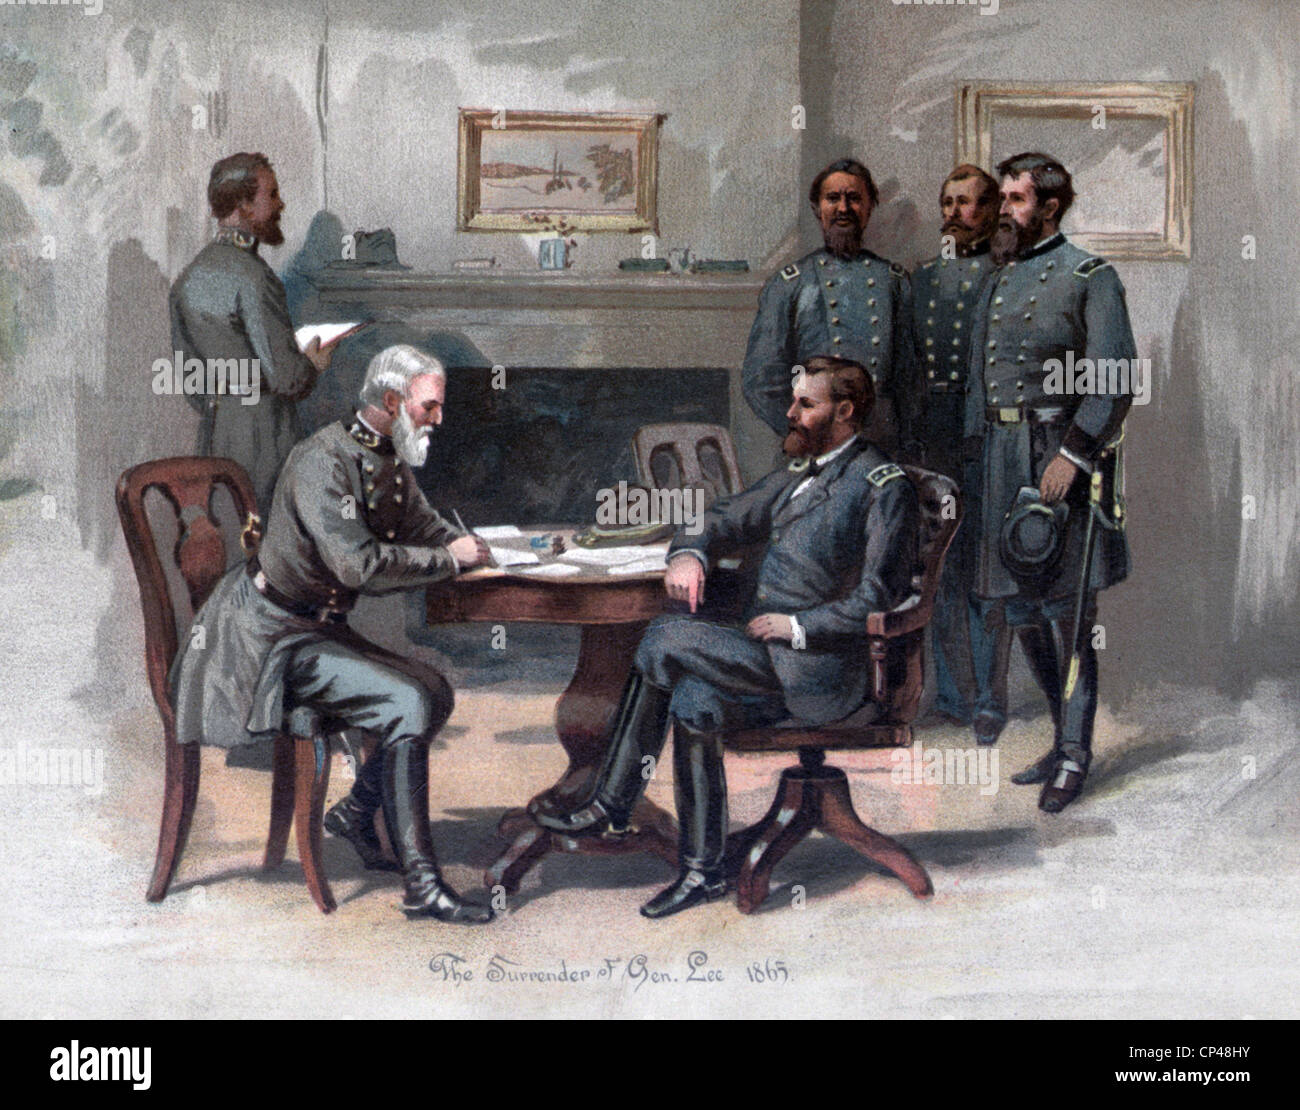 The Civil War. The Surrender at Appomatox Robert E. Lee and Ulysses S. Grant 1865 Stock Photo